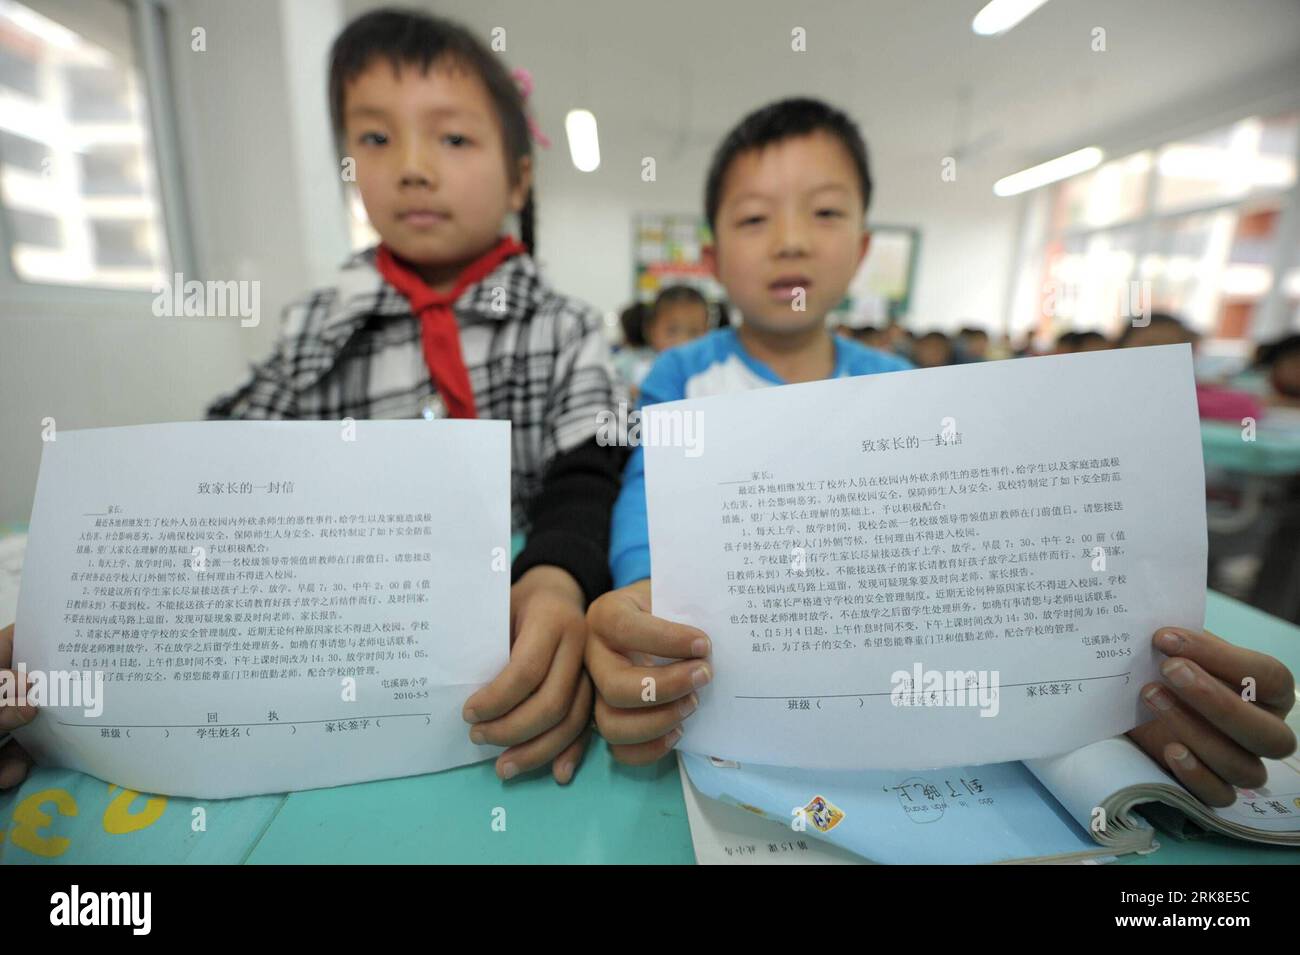 Bildnummer: 54025647  Datum: 05.05.2010  Copyright: imago/Xinhua  Pupils of Tunxilu Elementary School show letters of safety advice for their parents in Hefei, capital of east China s Anhui Province, May 5, 2010. Security measures were tightened to ensure the safety of schools and kindergartens in China, after a string of violent attacks against students occured. (Xinhua/Guo Chen) (zcq) (3)CHINA-HEFEI-SCHOOL-SECURITY (CN) PUBLICATIONxNOTxINxCHN Gesellschaft China Bildung Sicherheit kbdig xcb 2010 quer    Bildnummer 54025647 Date 05 05 2010 Copyright Imago XINHUA Pupils of  Elementary School Sh Stock Photo